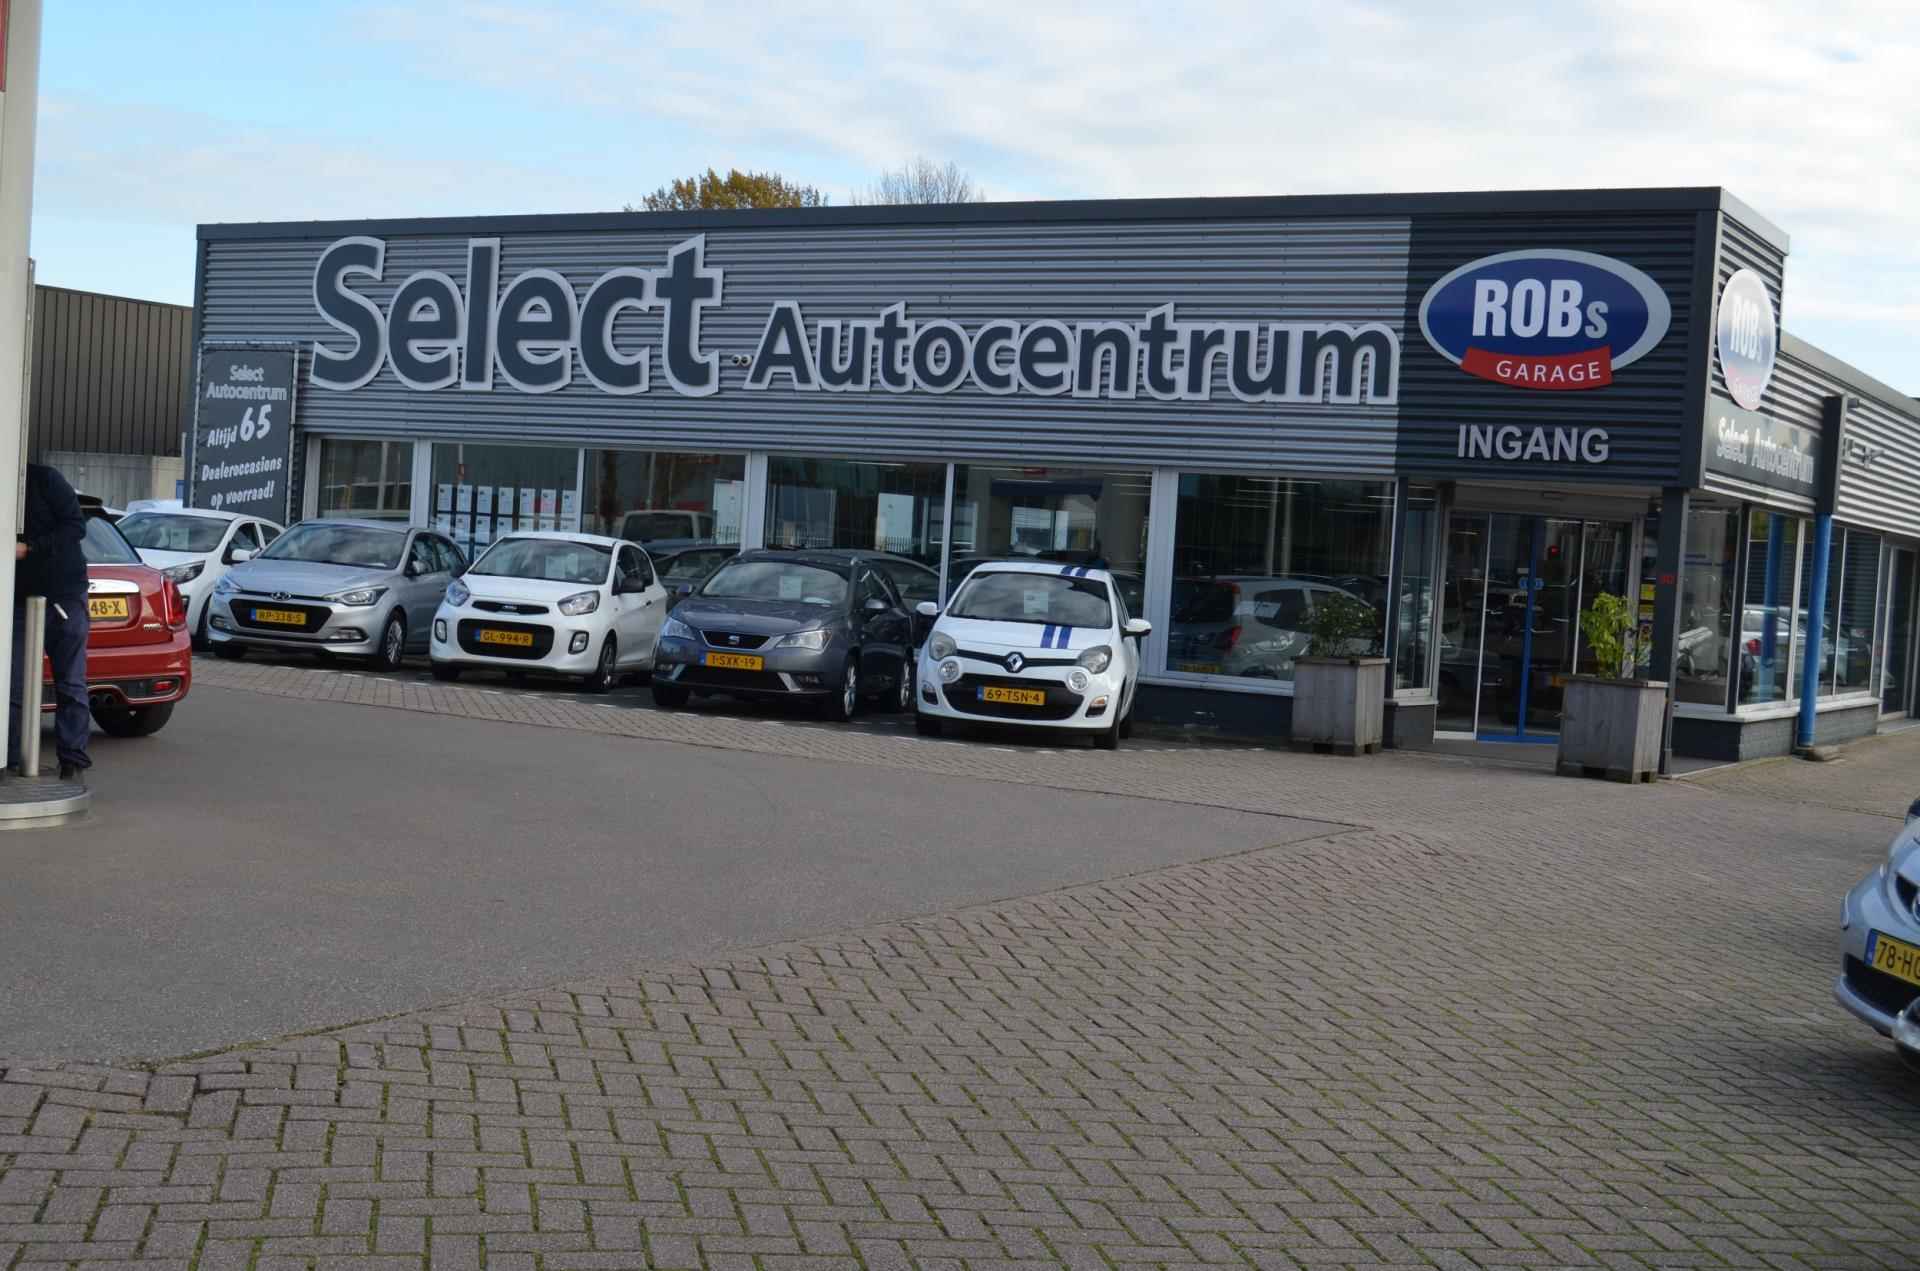 Citroen Grand C4 Picasso 1.2 7 PERS|7 PERSOONS|2E PAASDAG OPEN. - 14/30